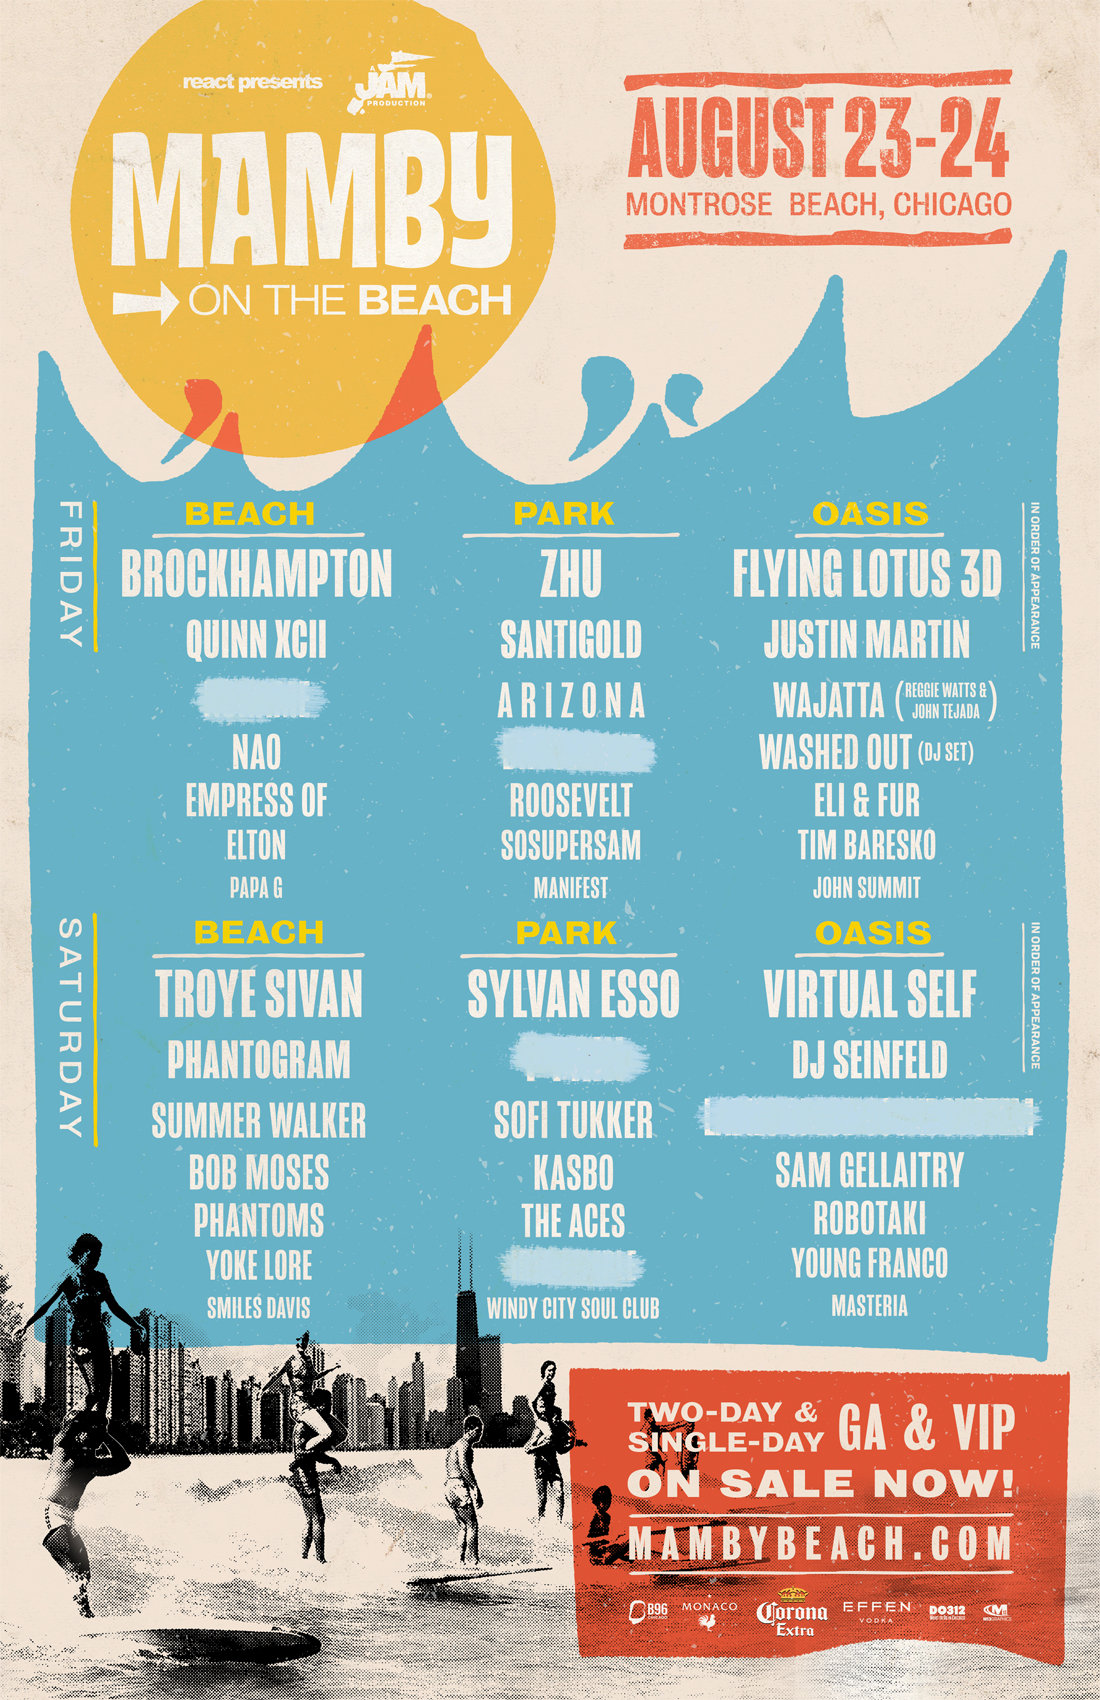 Mamby at the Beach 2019 Phase 1 Lineup